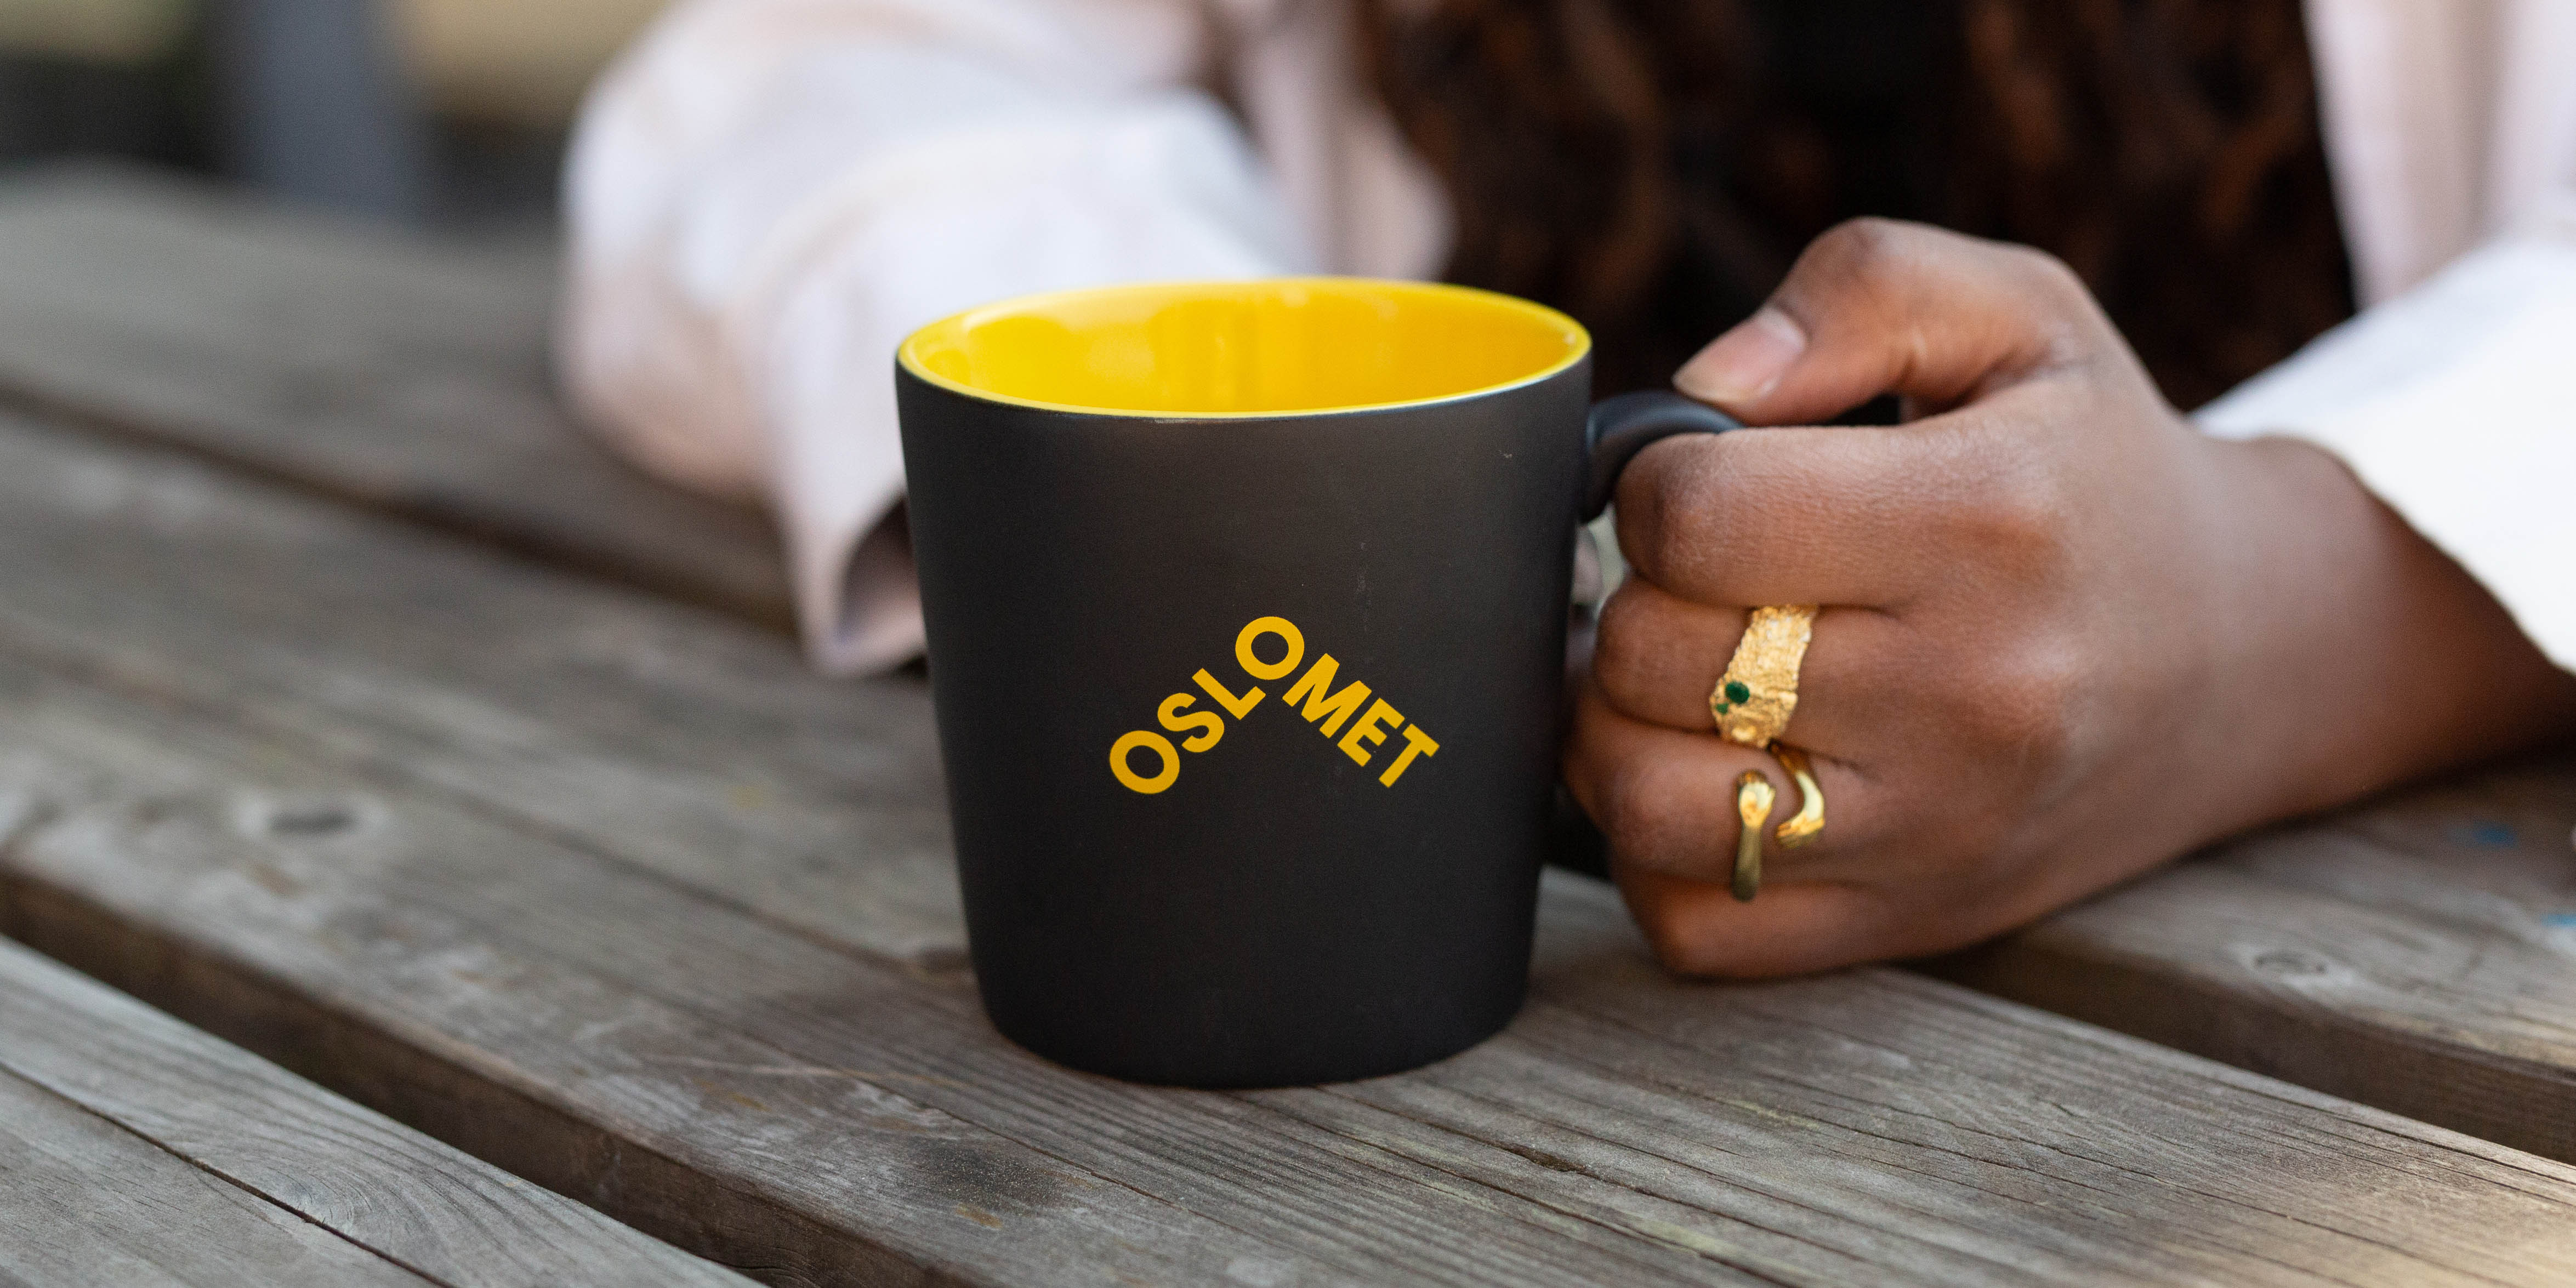 A black ceramic cup with a yellow OsloMet logo